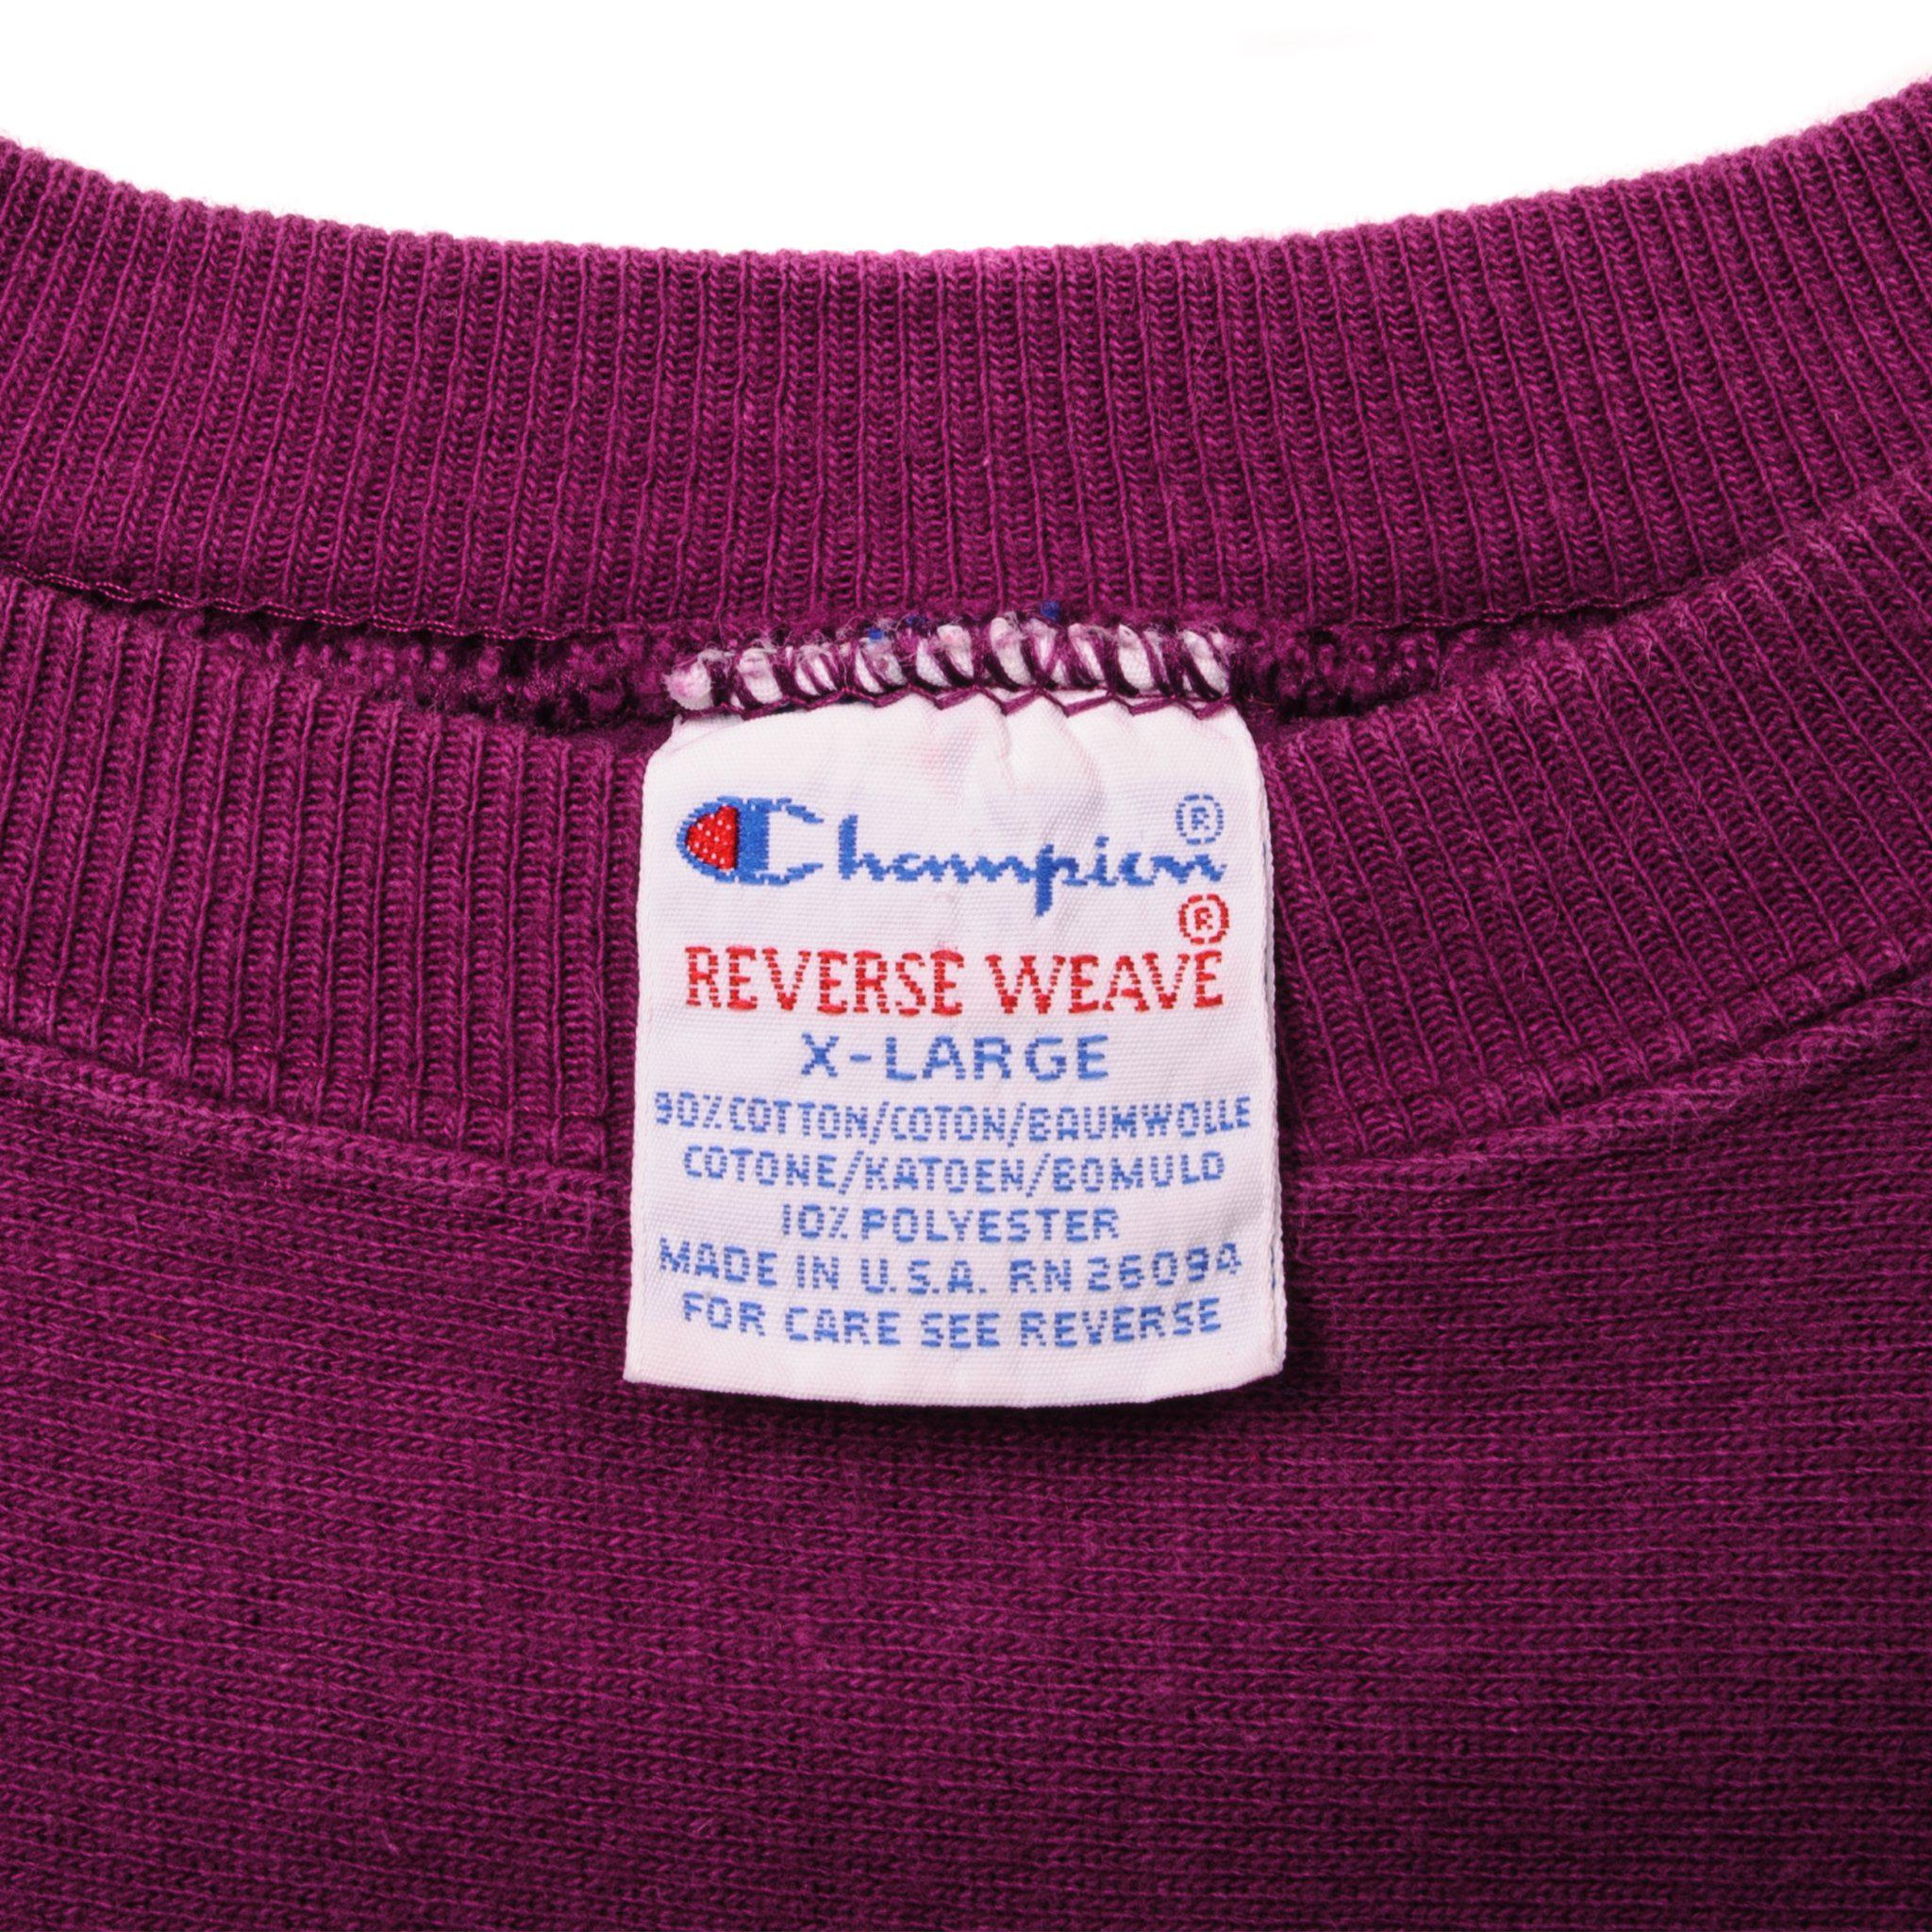 ★90s champion reverse weave★made in USA